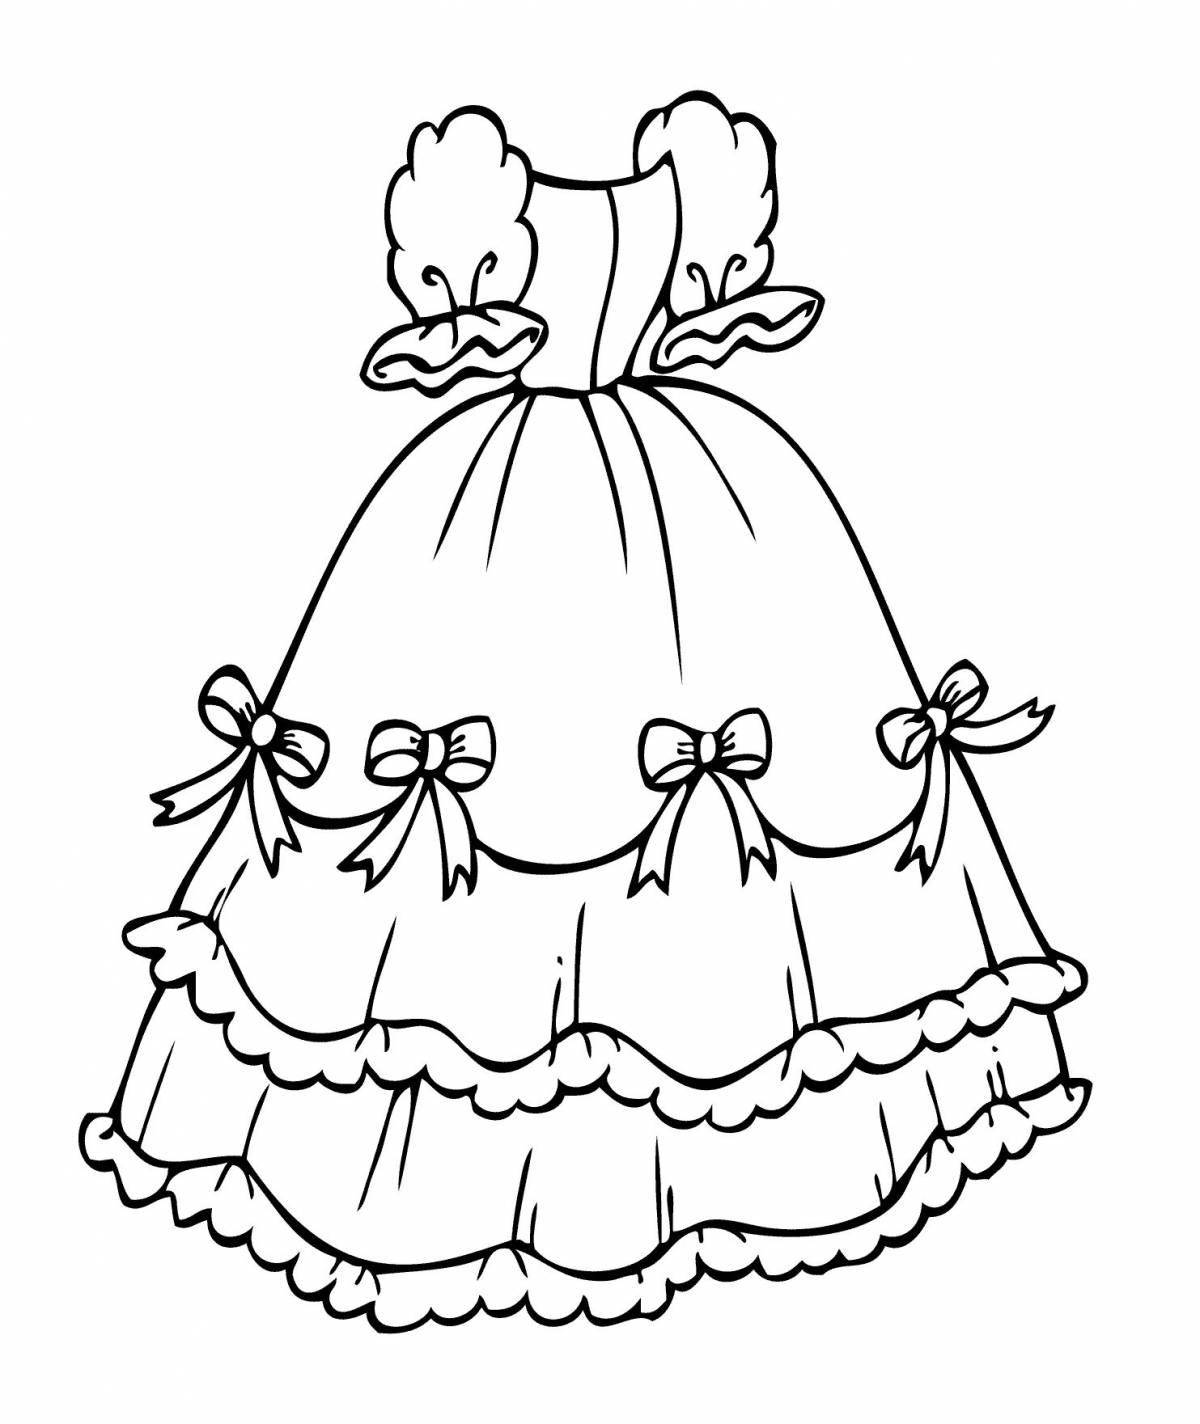 Dazzling Outfit Coloring Page